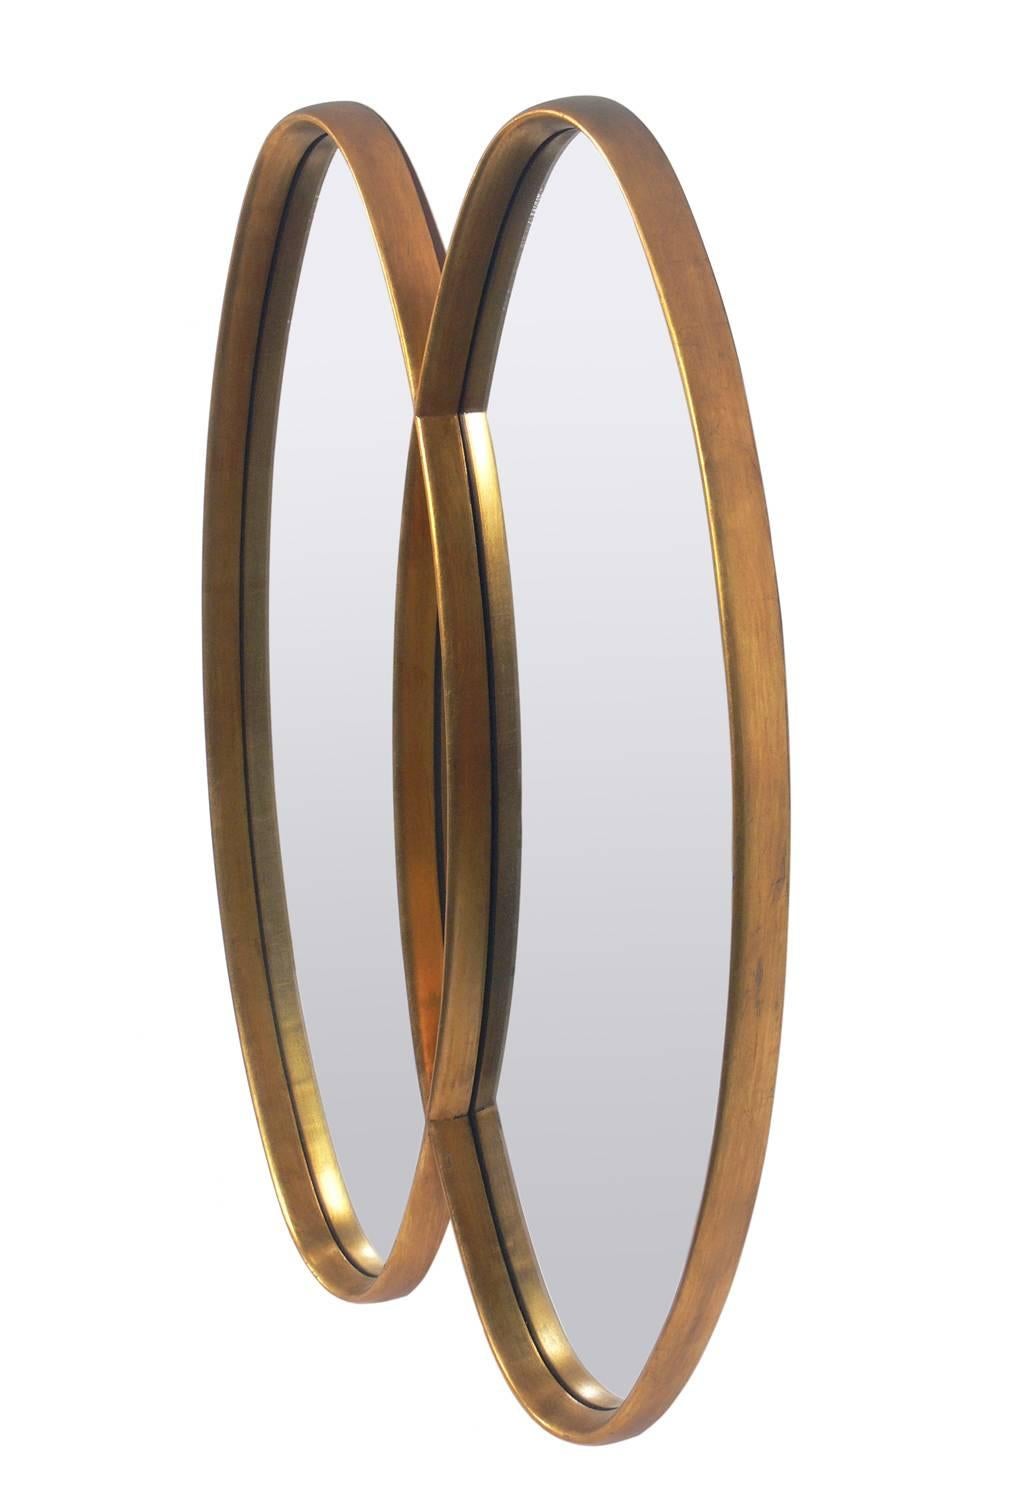 Modernist oval gold leaf double mirror, American, circa 1960s. It exhibits wonderful patina and wear to the gold leafing, beautifully exposing a bit of the Chinese red bole or underlayer. This mirror has a sculptural form and would fit seamlessly